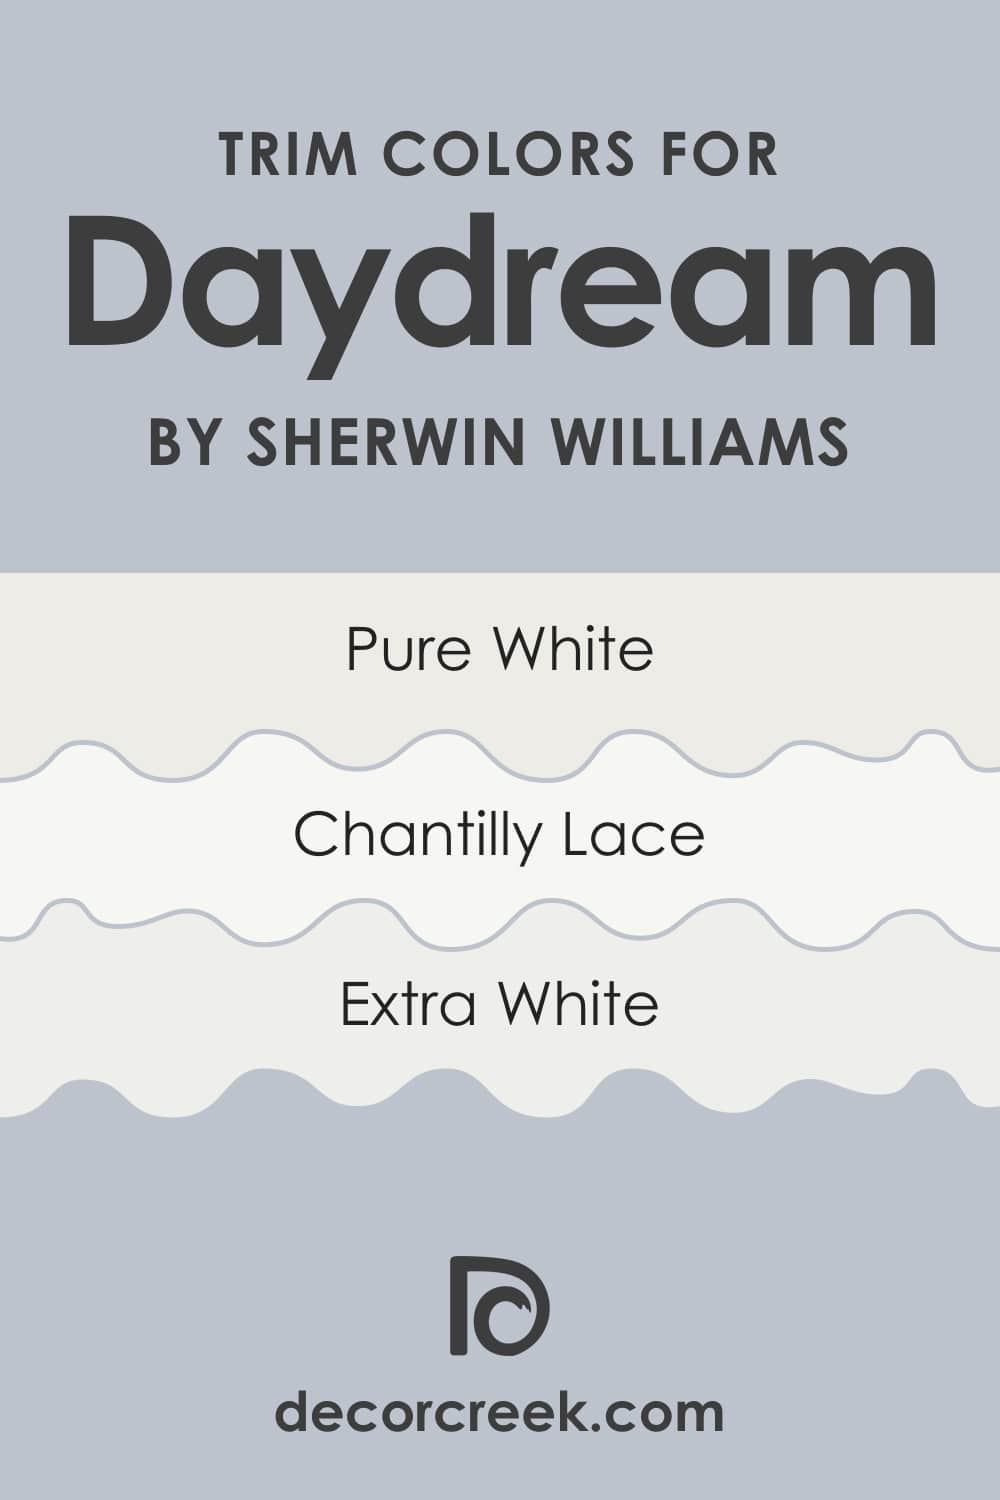 What Is the Best Trim Color For SW-6541 Daydream?